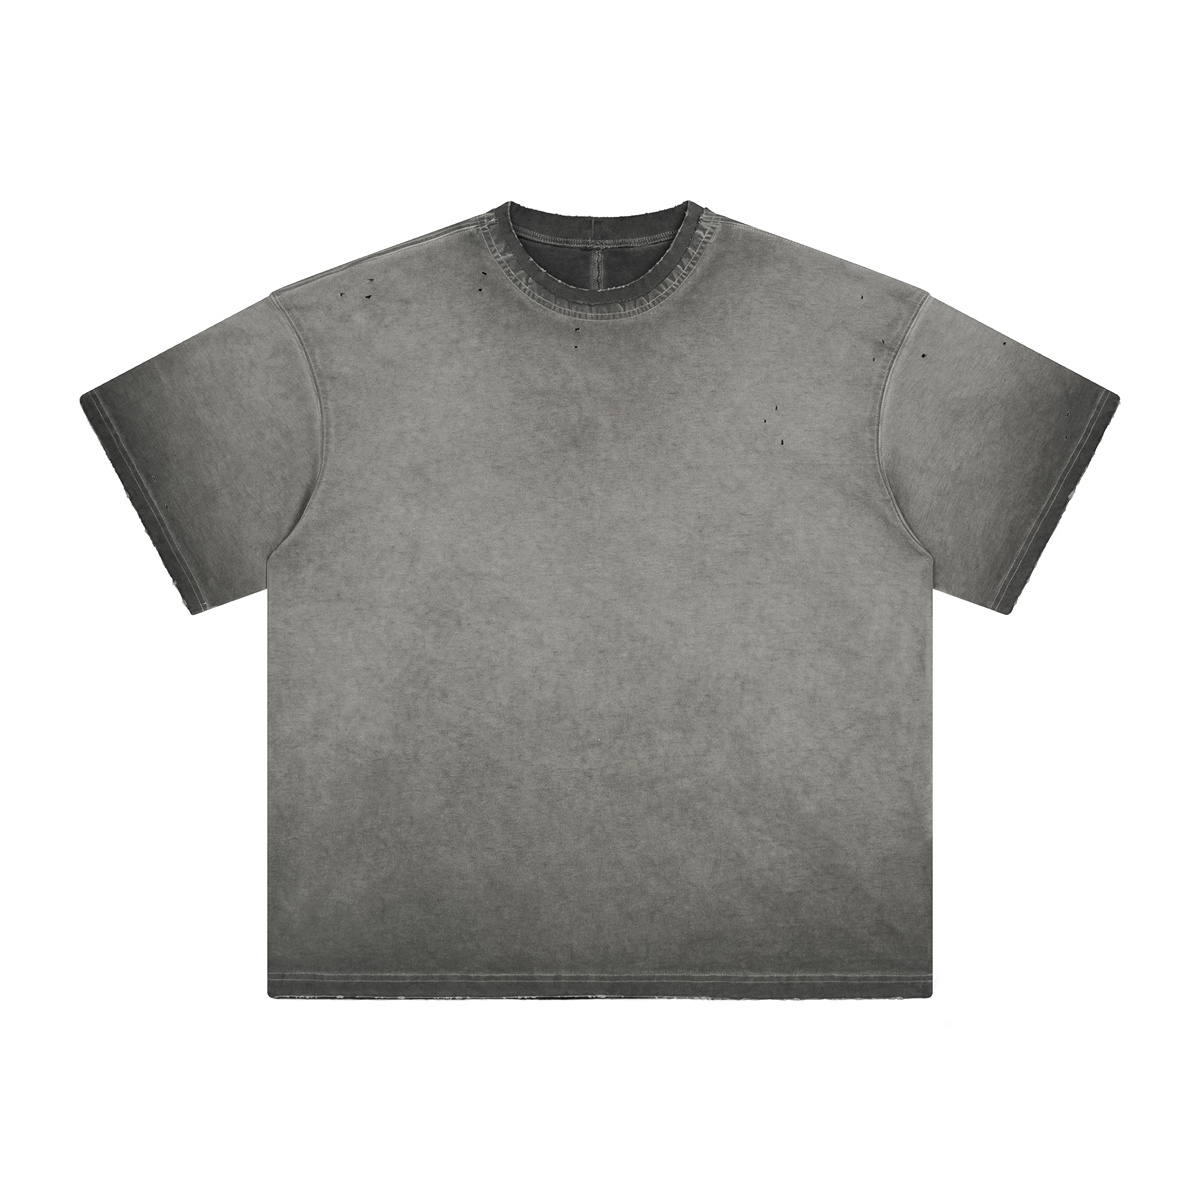 AR-021 stone washed distressed t shirt 250gsm